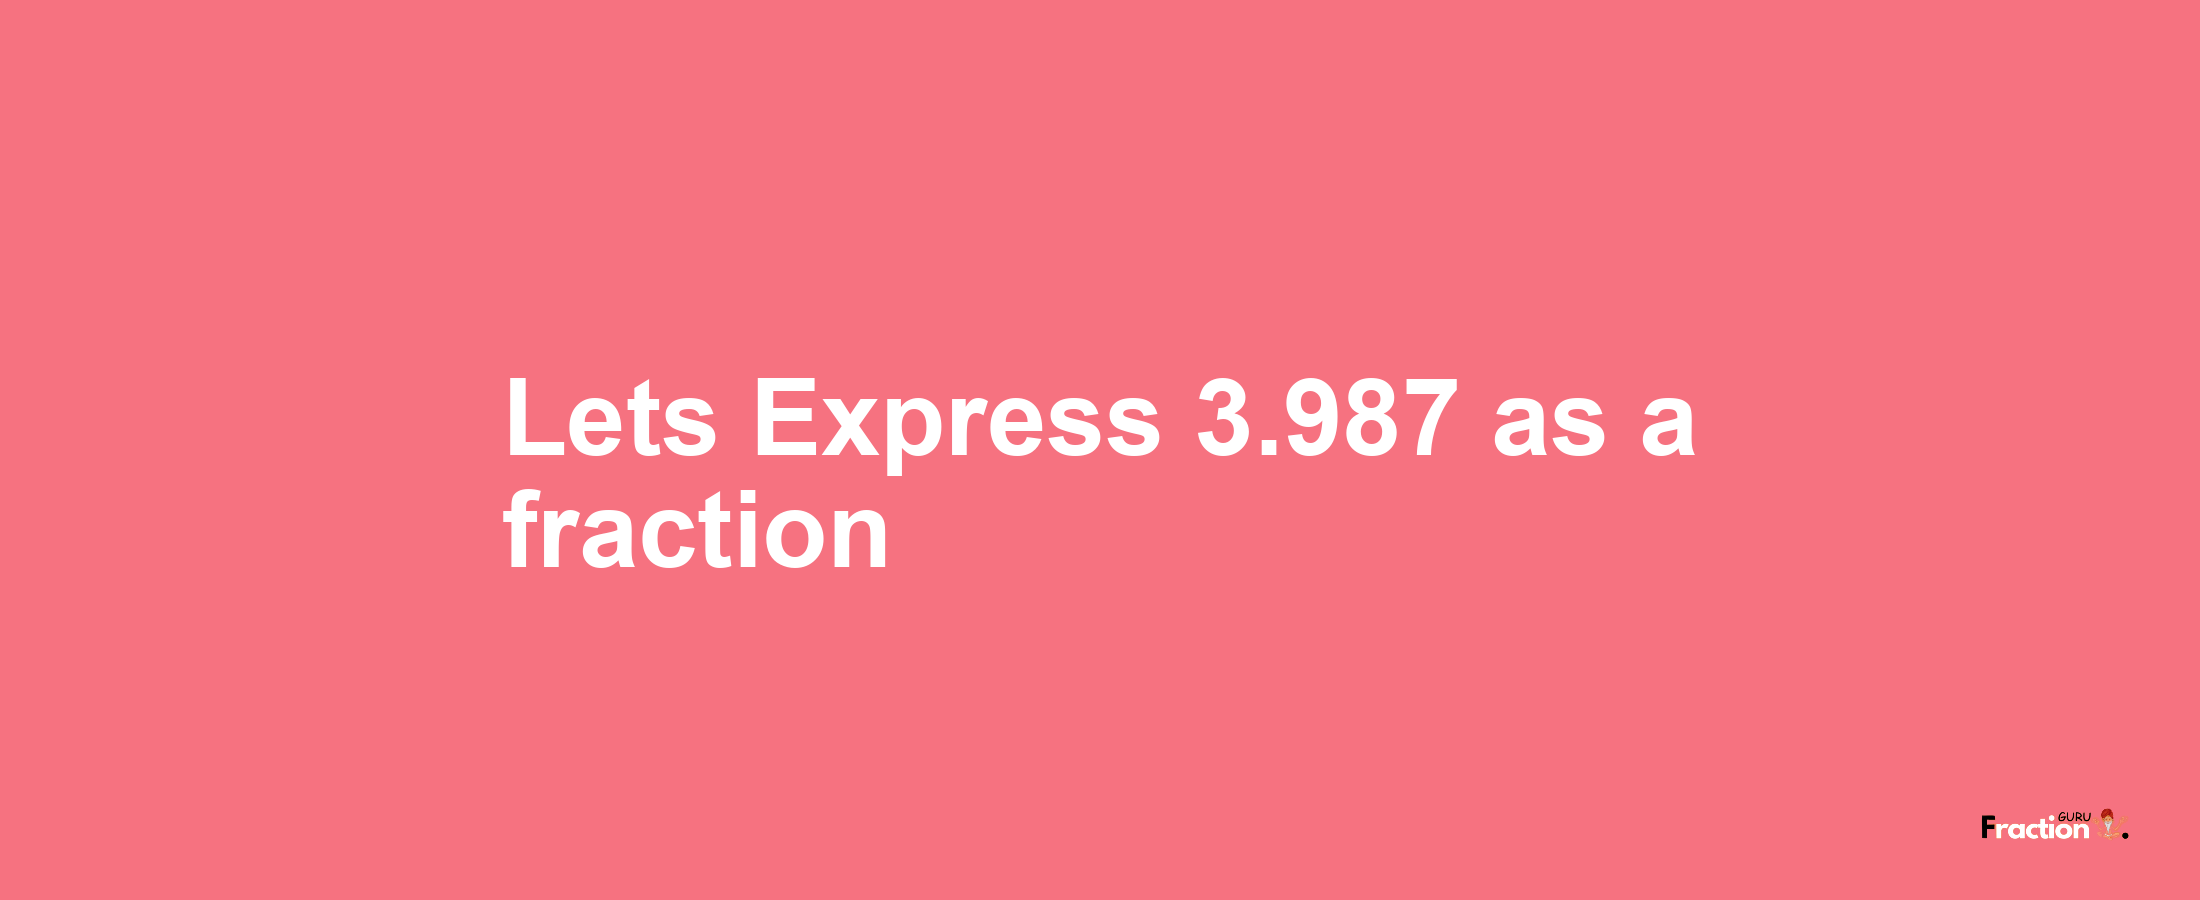 Lets Express 3.987 as afraction